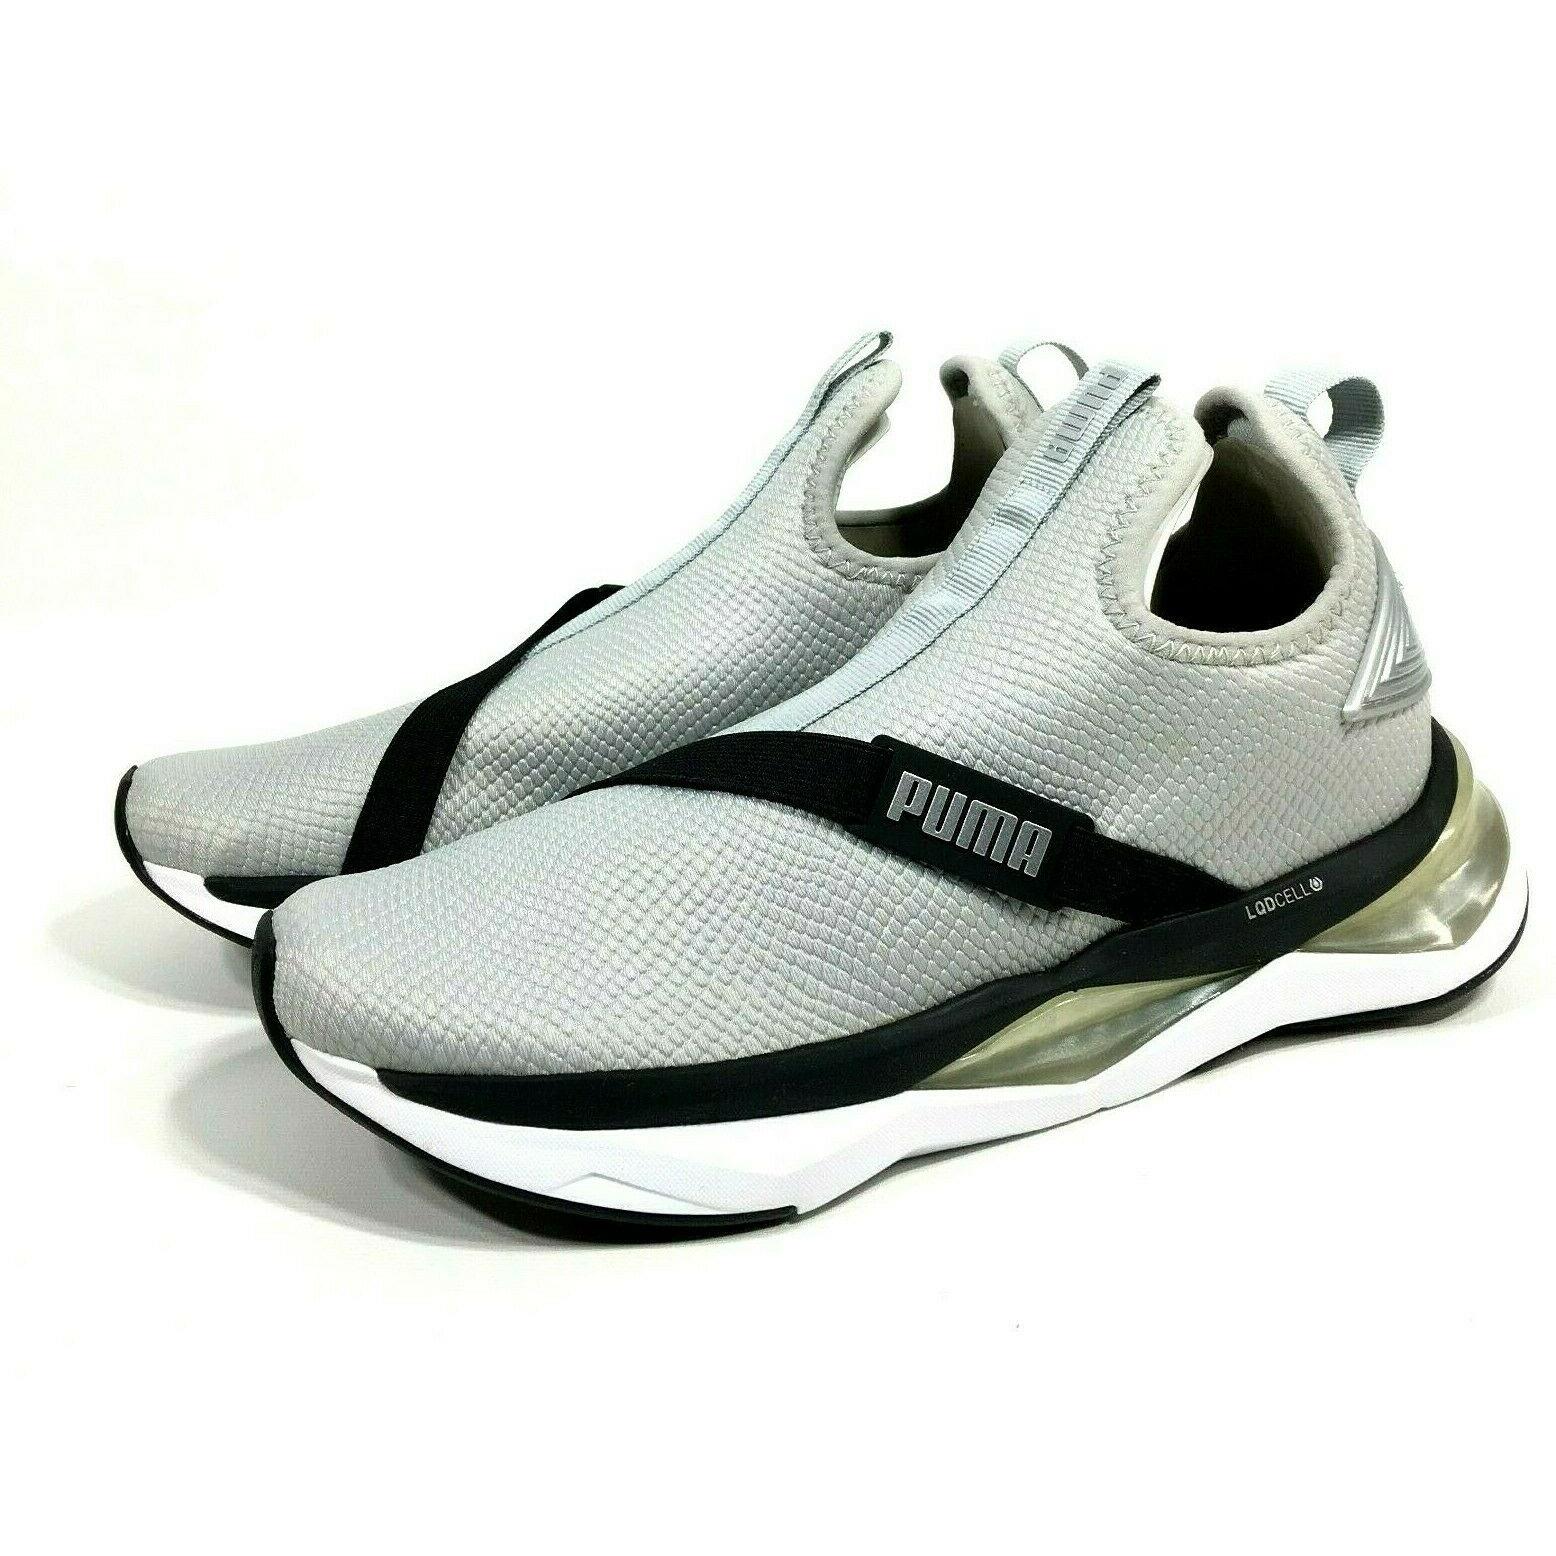 Puma Womens Lqdcell Shatter Mid High Rise Training Shoes Size 7.5 Gray